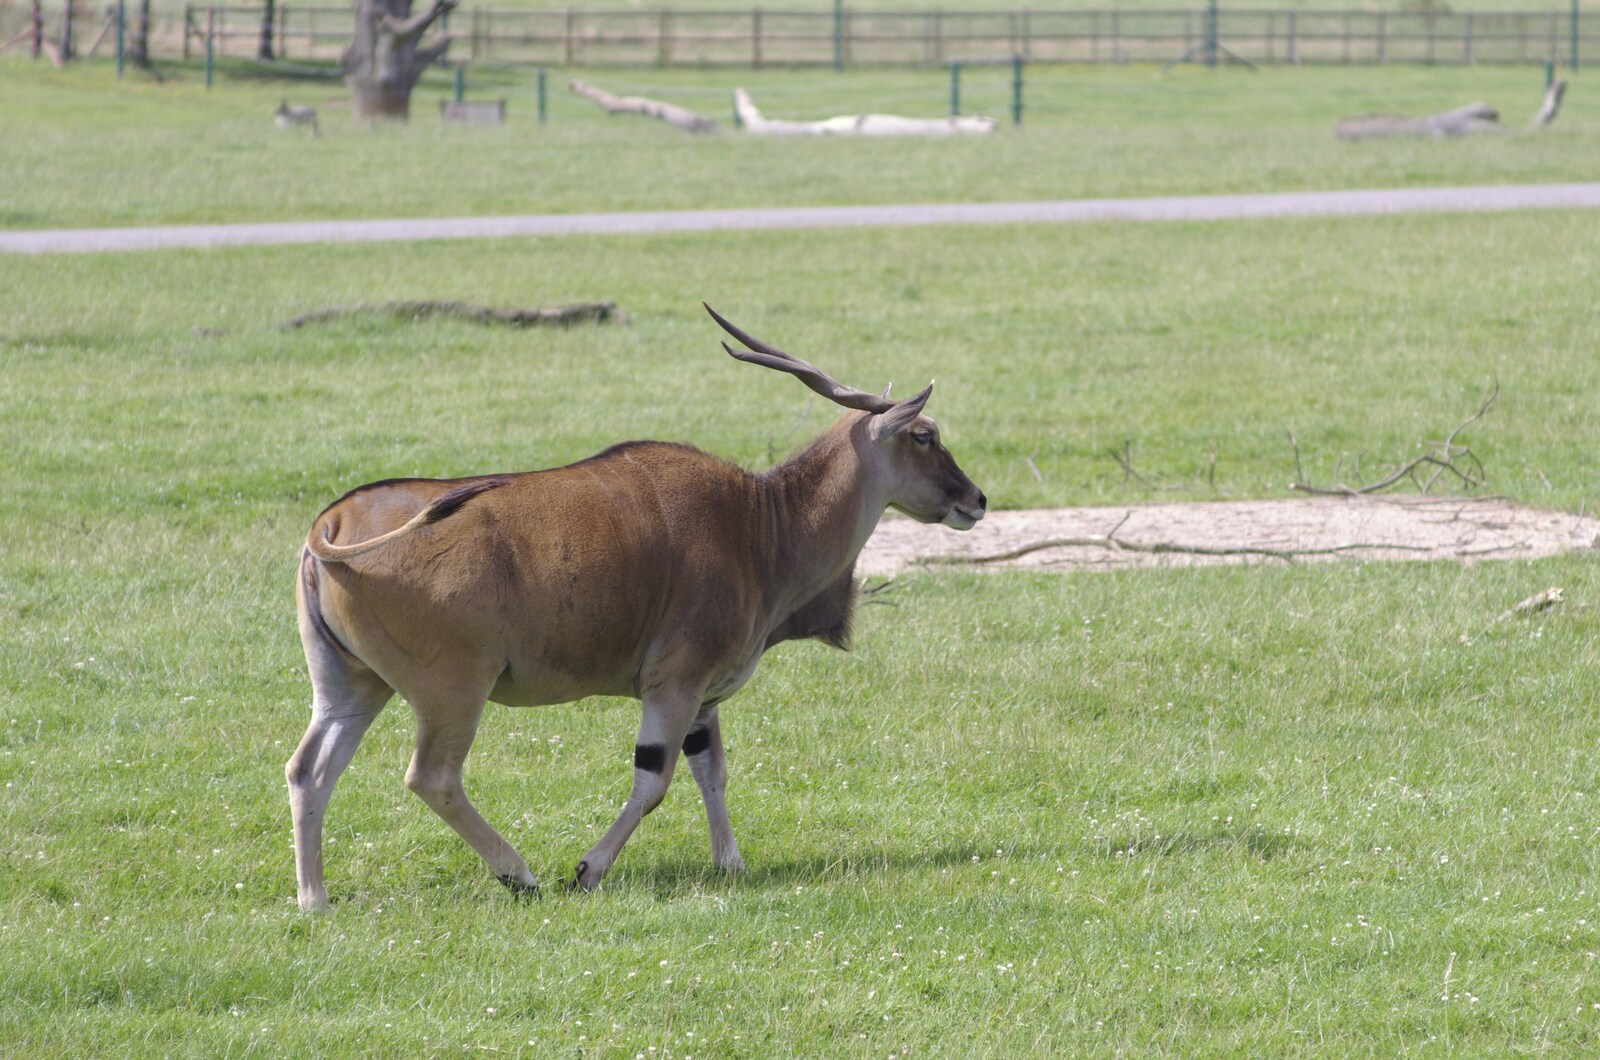 An Eland - the largest antelope there is from The BBs in a Garden, and a Qualcomm Safari, Woburn, Bedfordshire - 22nd July 2007